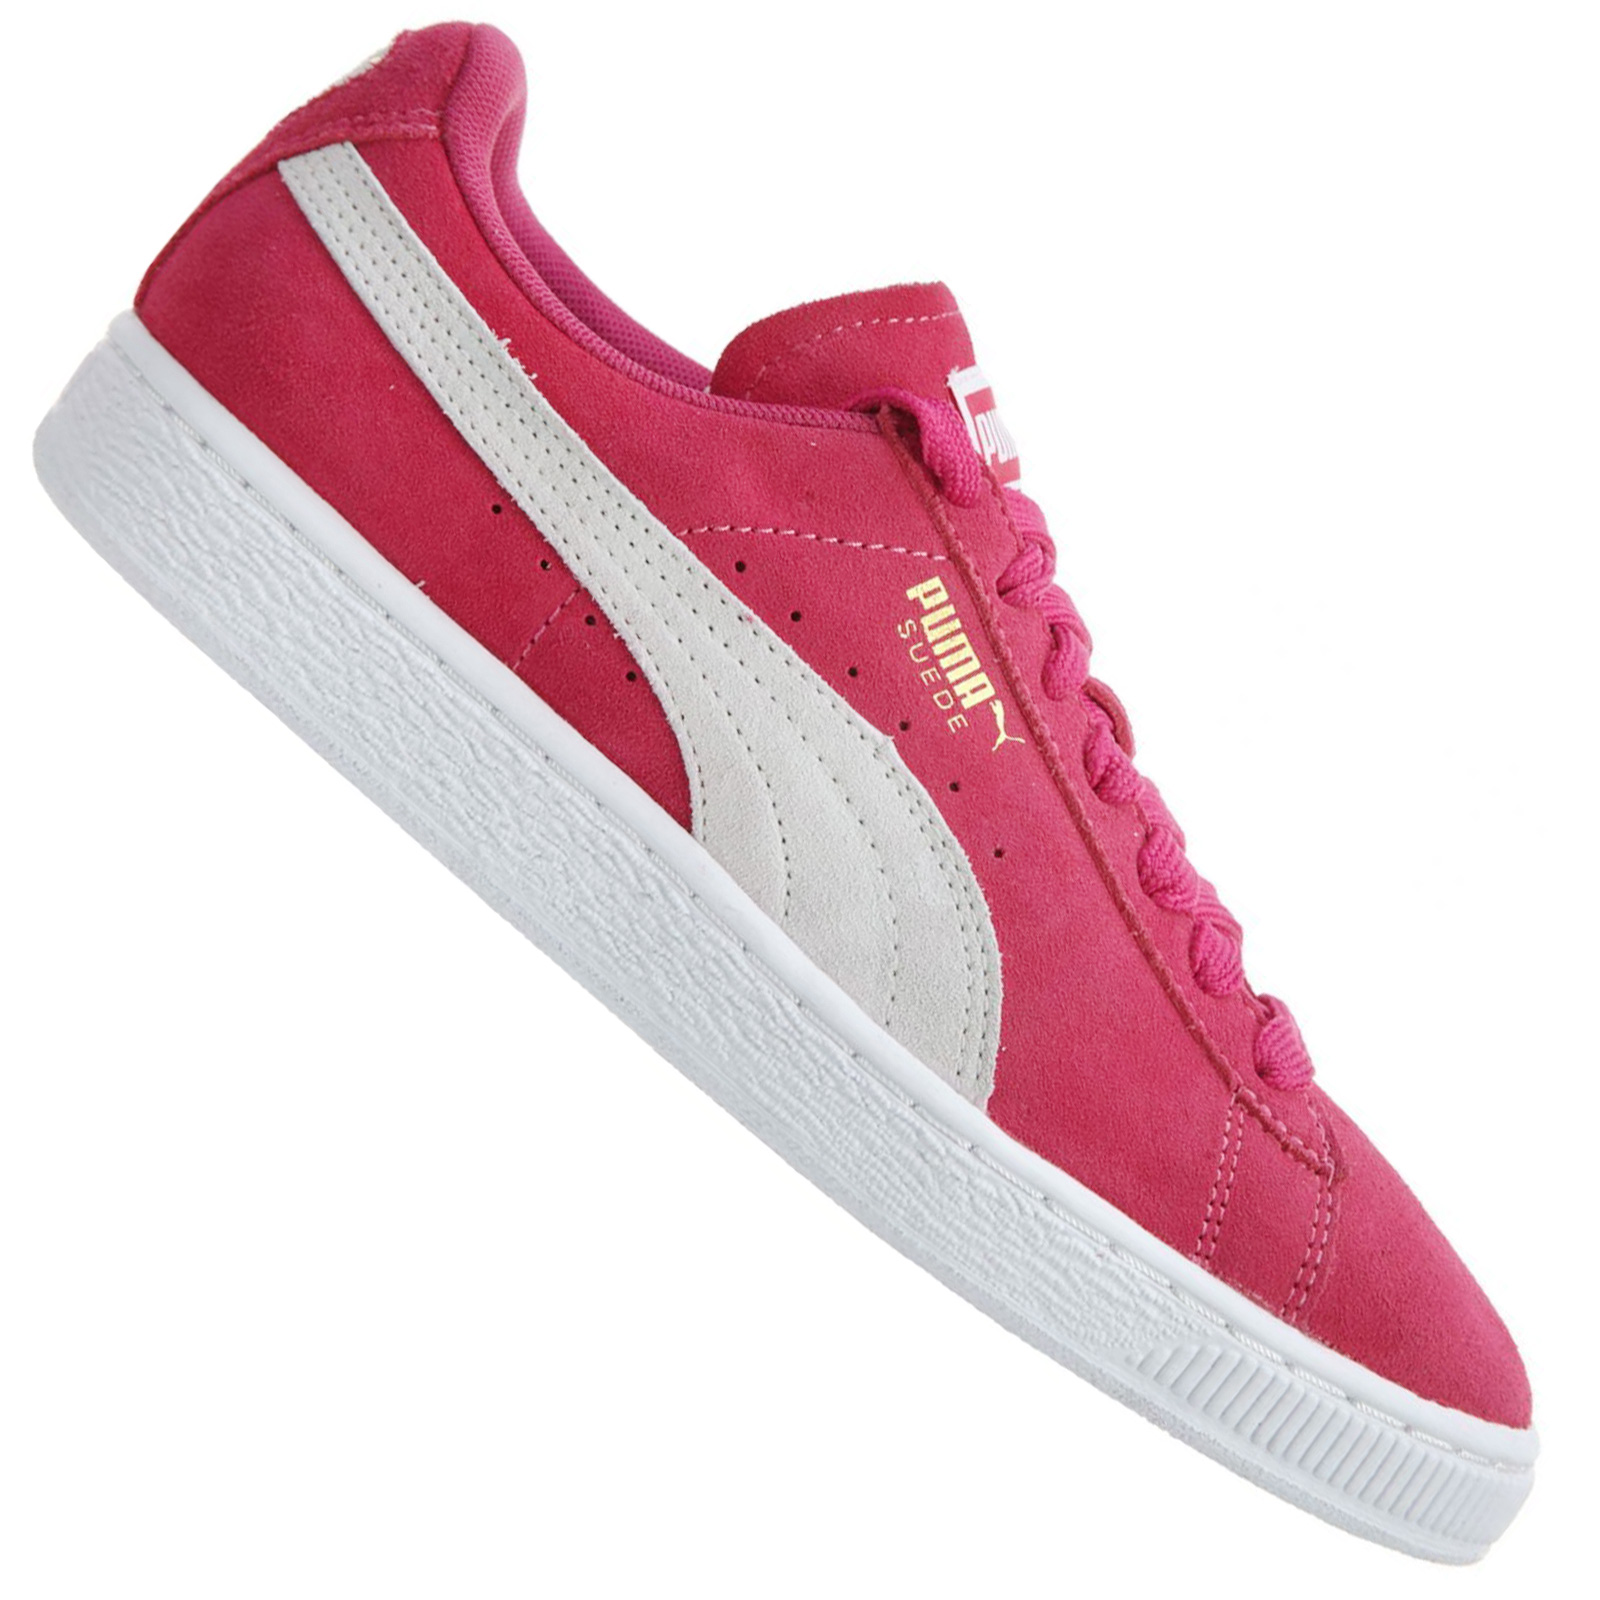 white and pink puma shoes